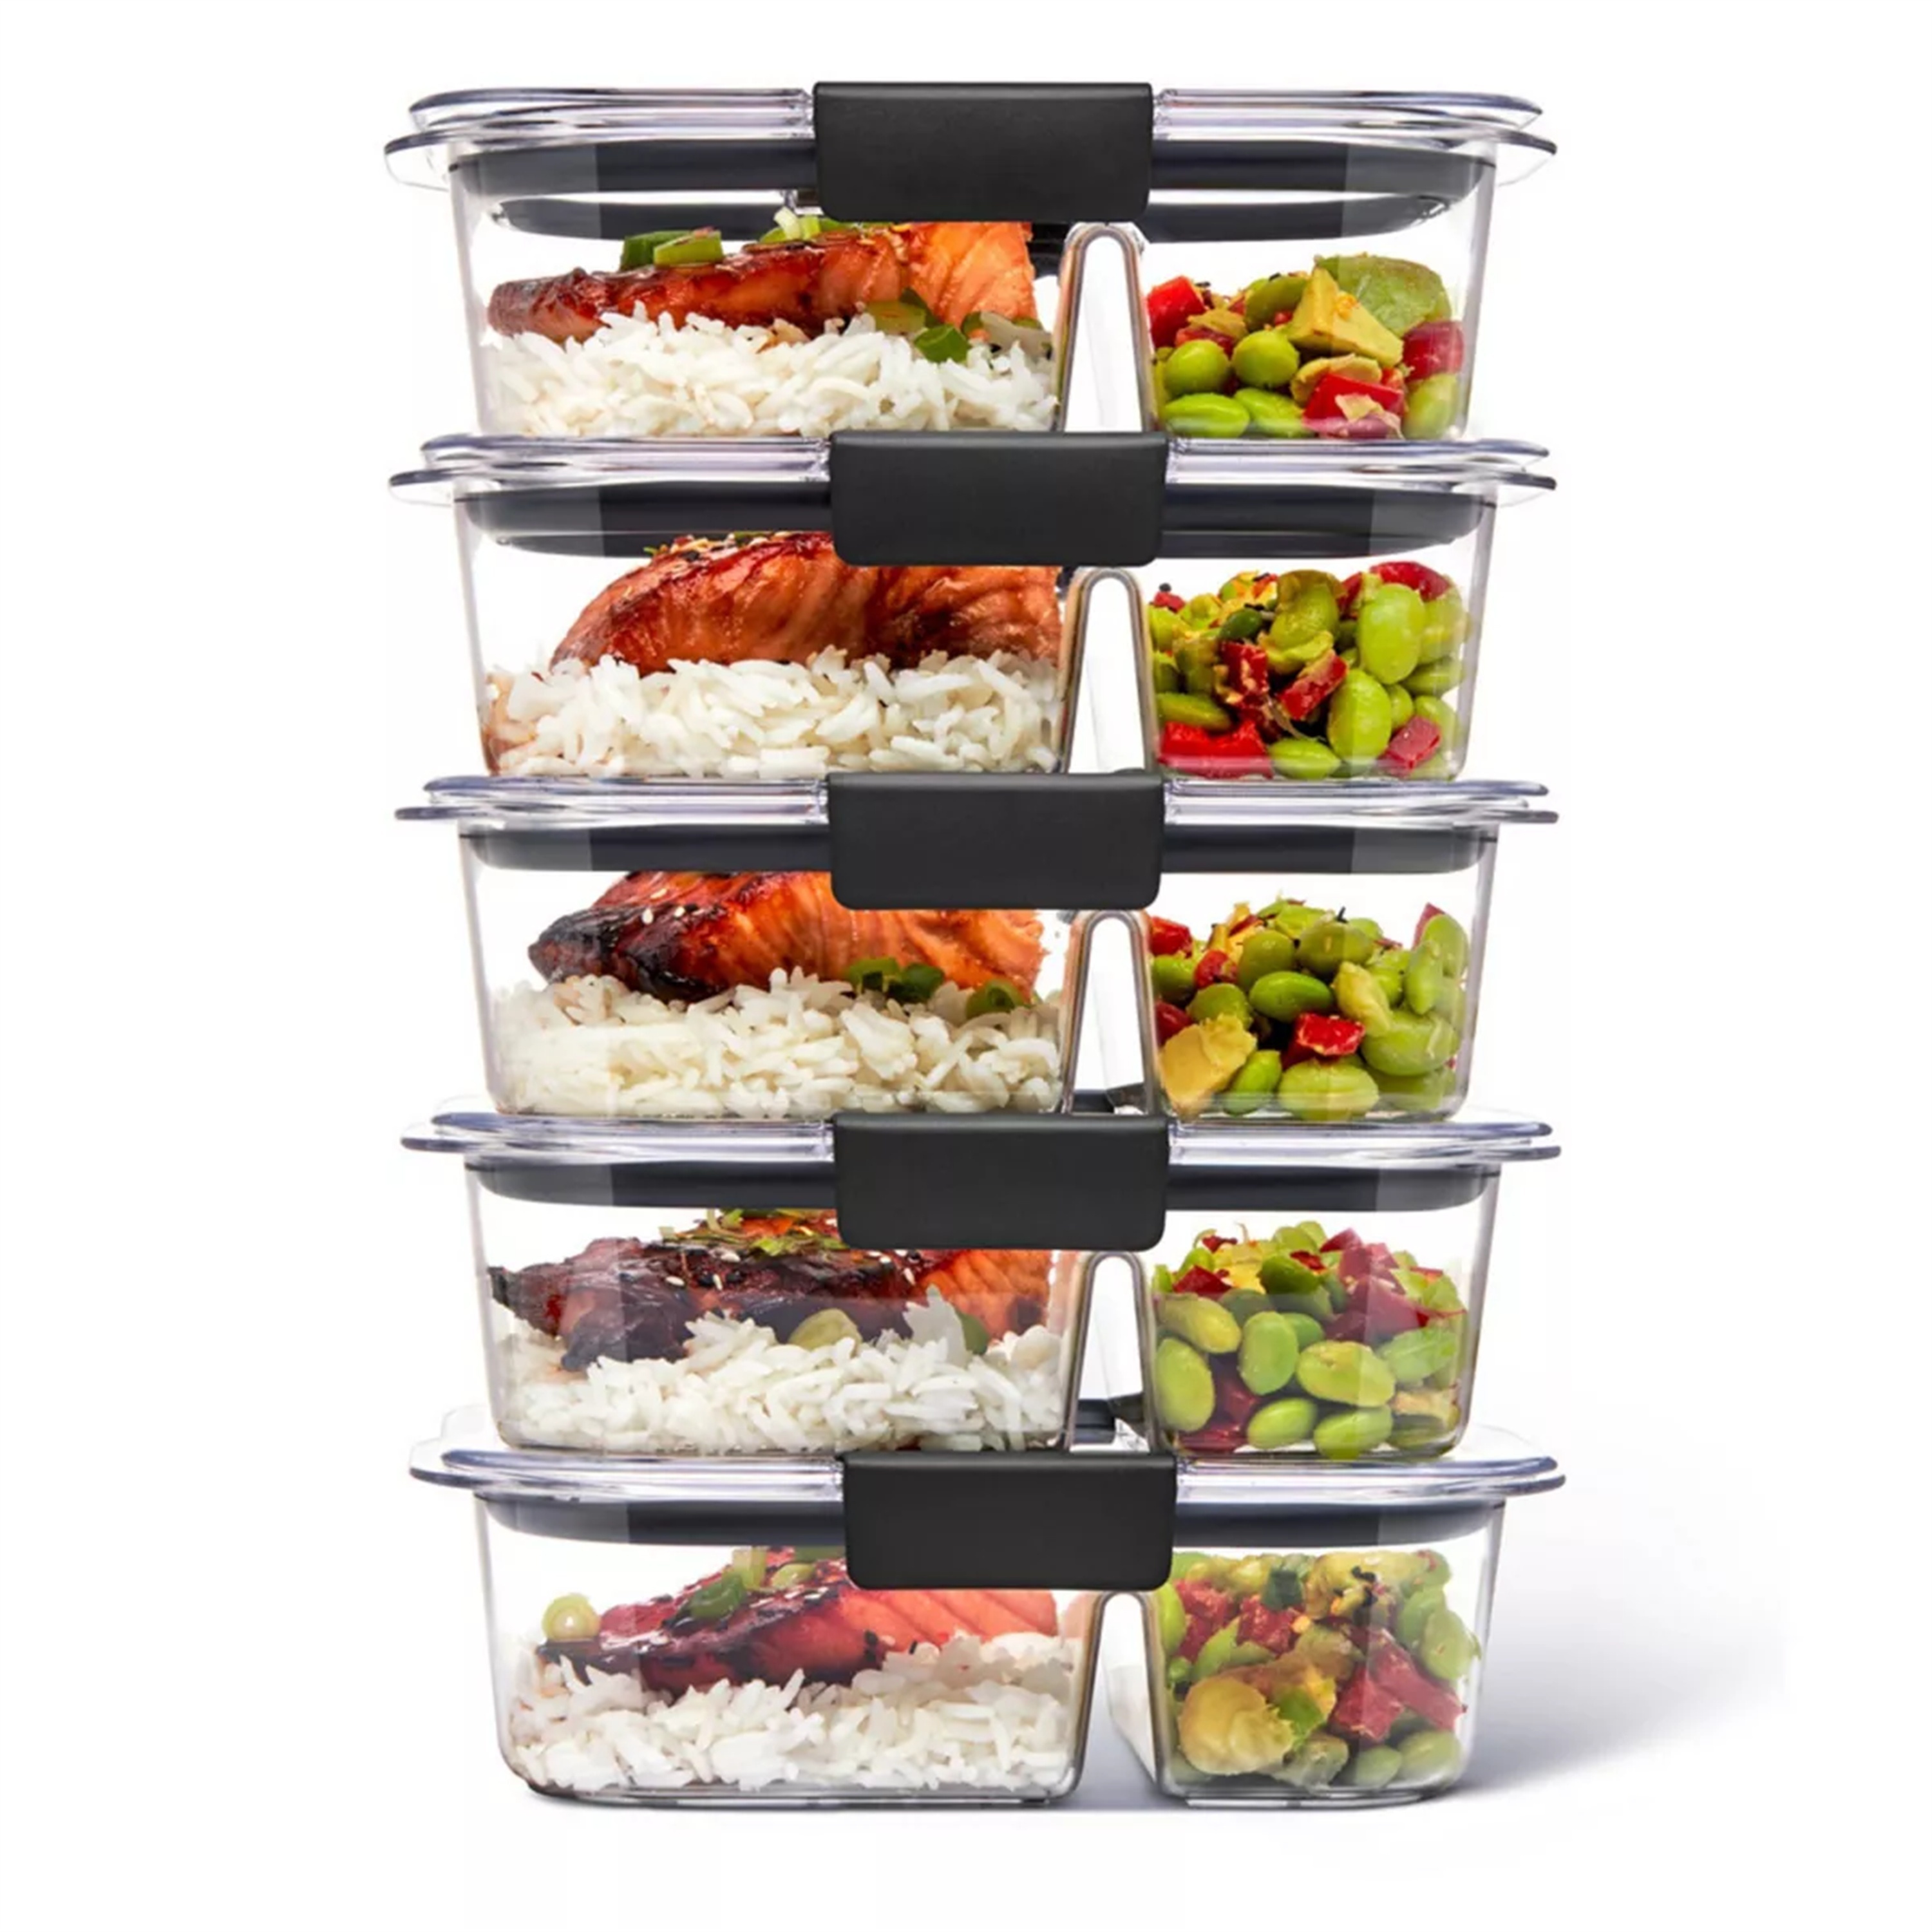 

5pk 2.85 Cup Meal Prep Containers, 2-compartment Food Storage Containers